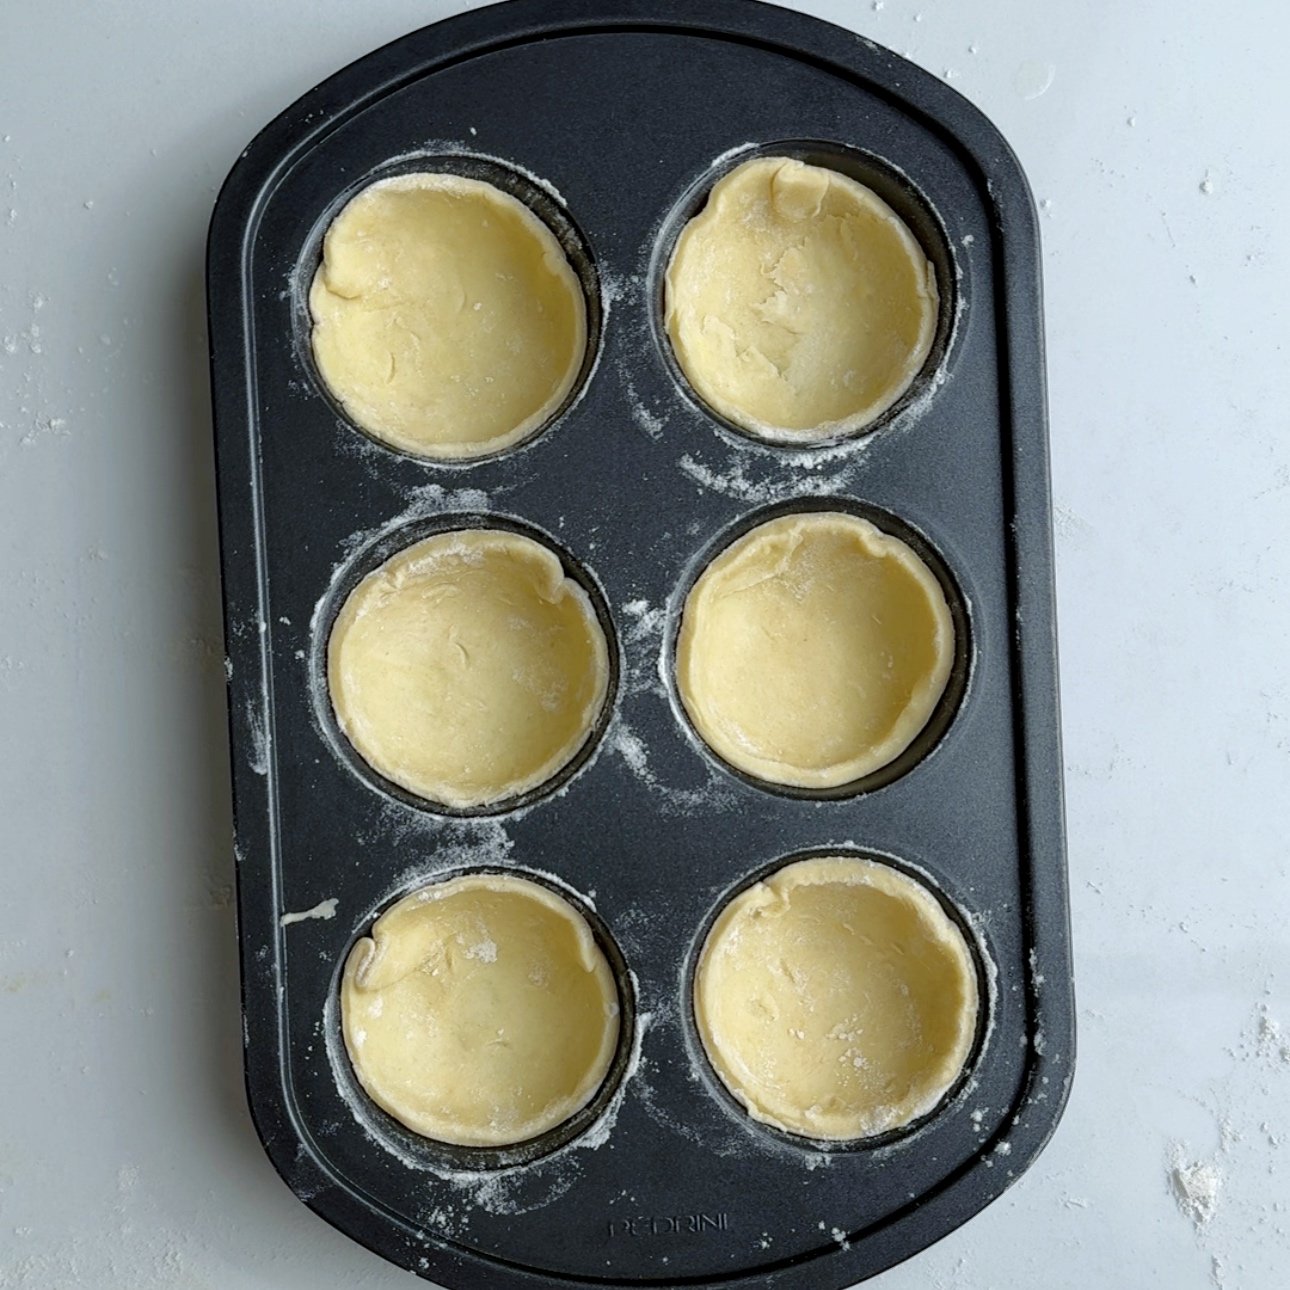 pastry shells stuffed into a 6 compartment muffin tin